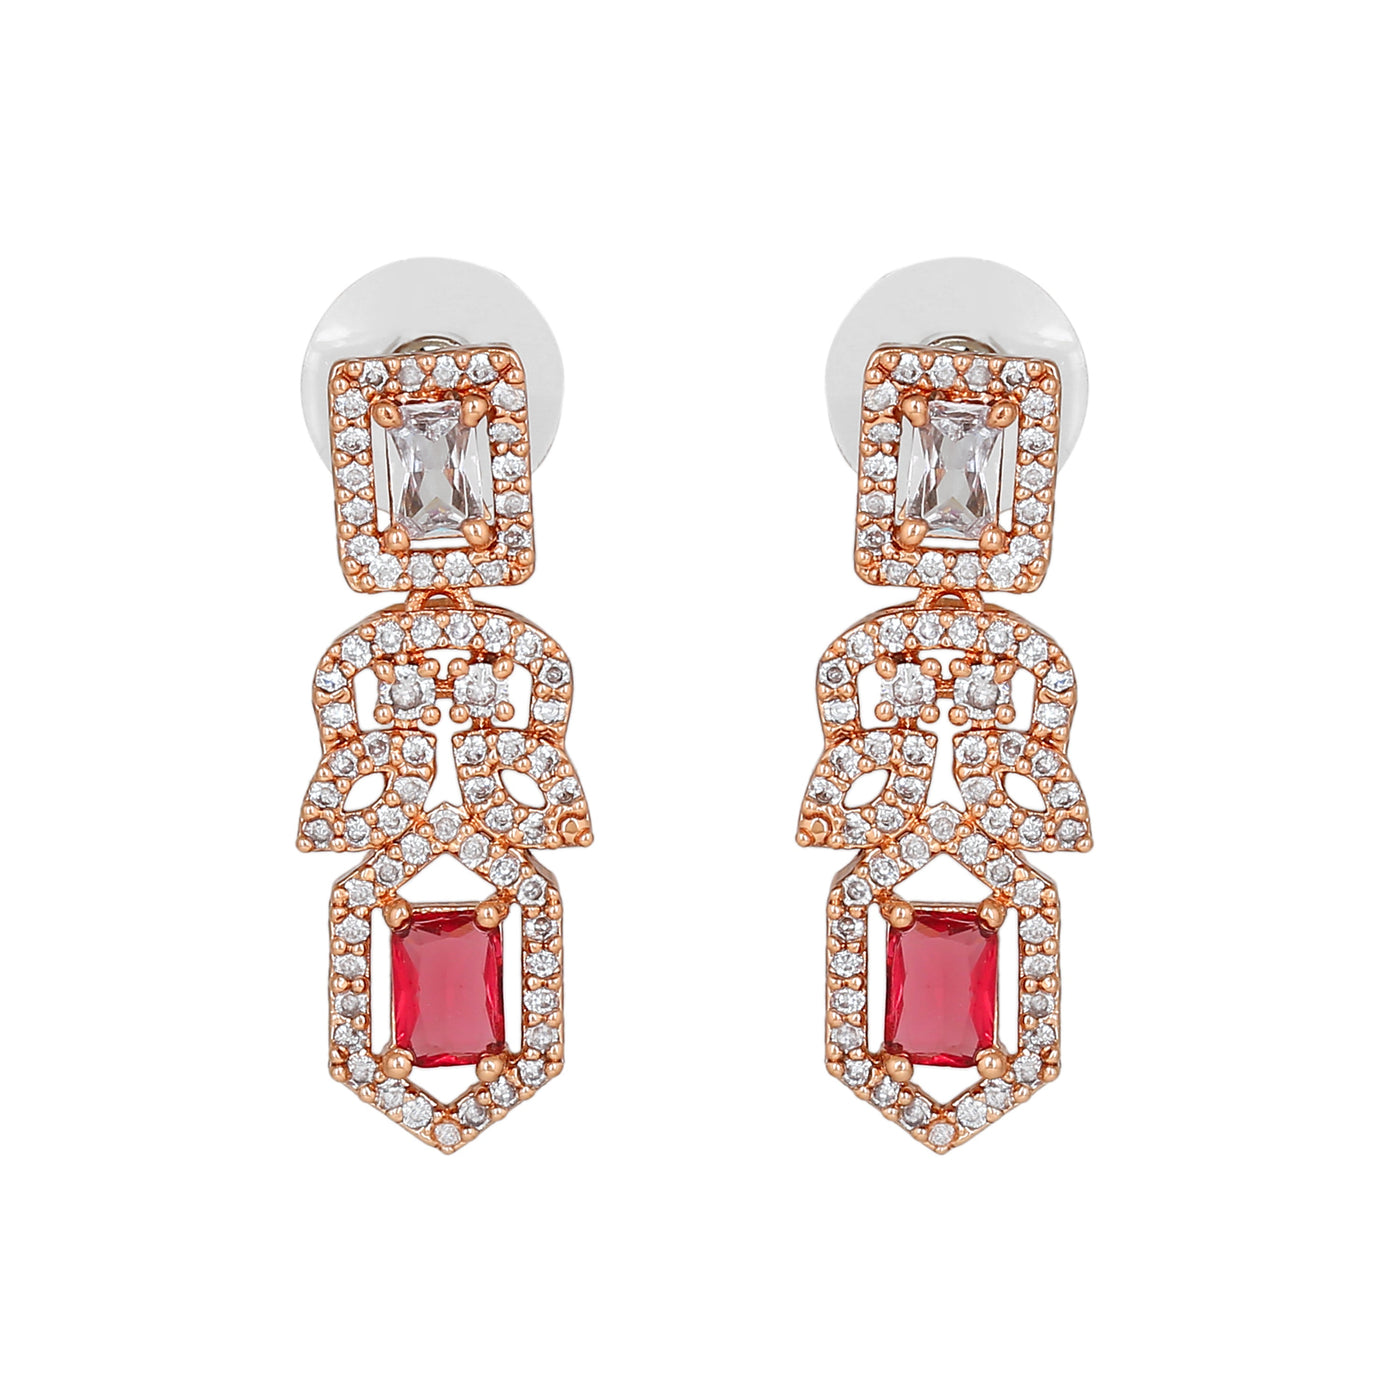 Estele Rose Gold Plated CZ Gleaming Drop Earrings with Tourmaline Pink Stones for Women